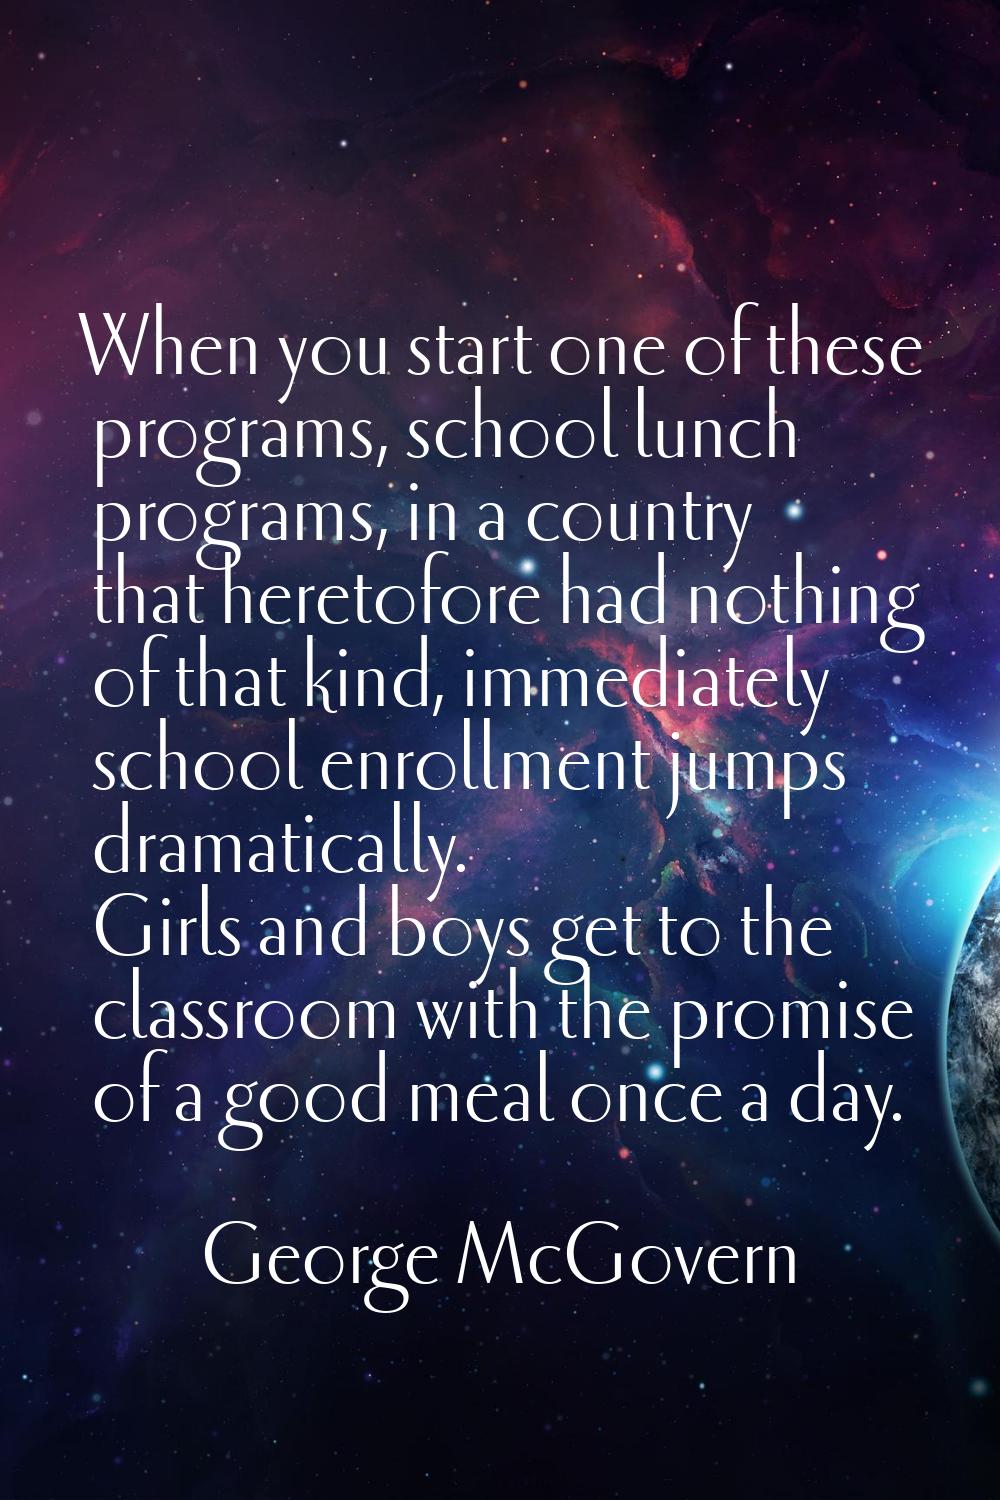 When you start one of these programs, school lunch programs, in a country that heretofore had nothi